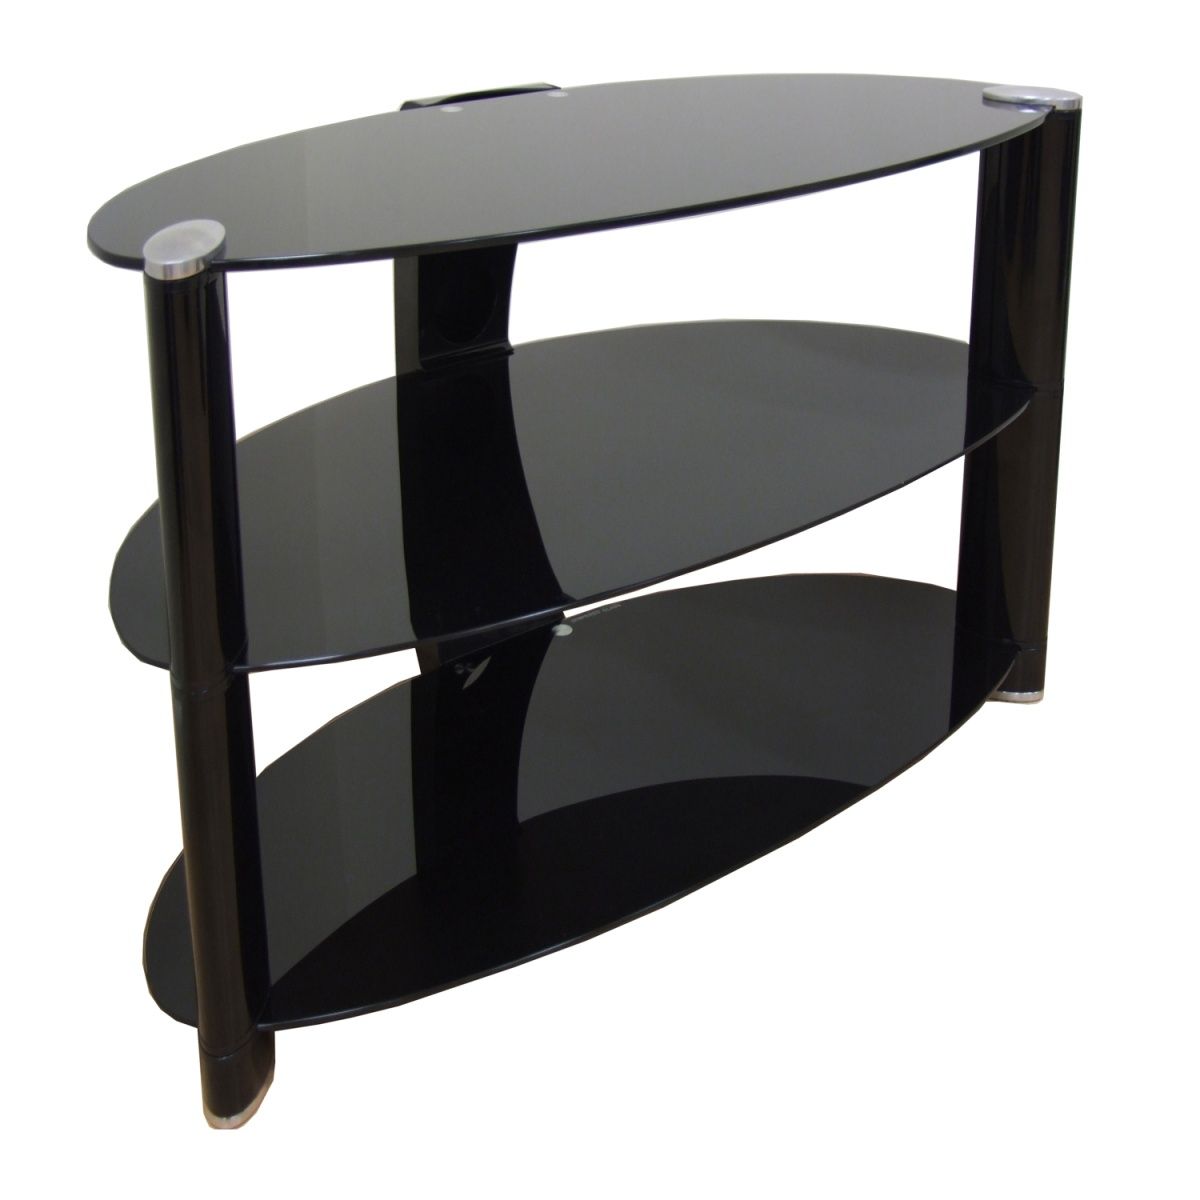 Oval High Gloss Black Flat Screen Tv Stand Within Oval Tv Stands (View 8 of 15)